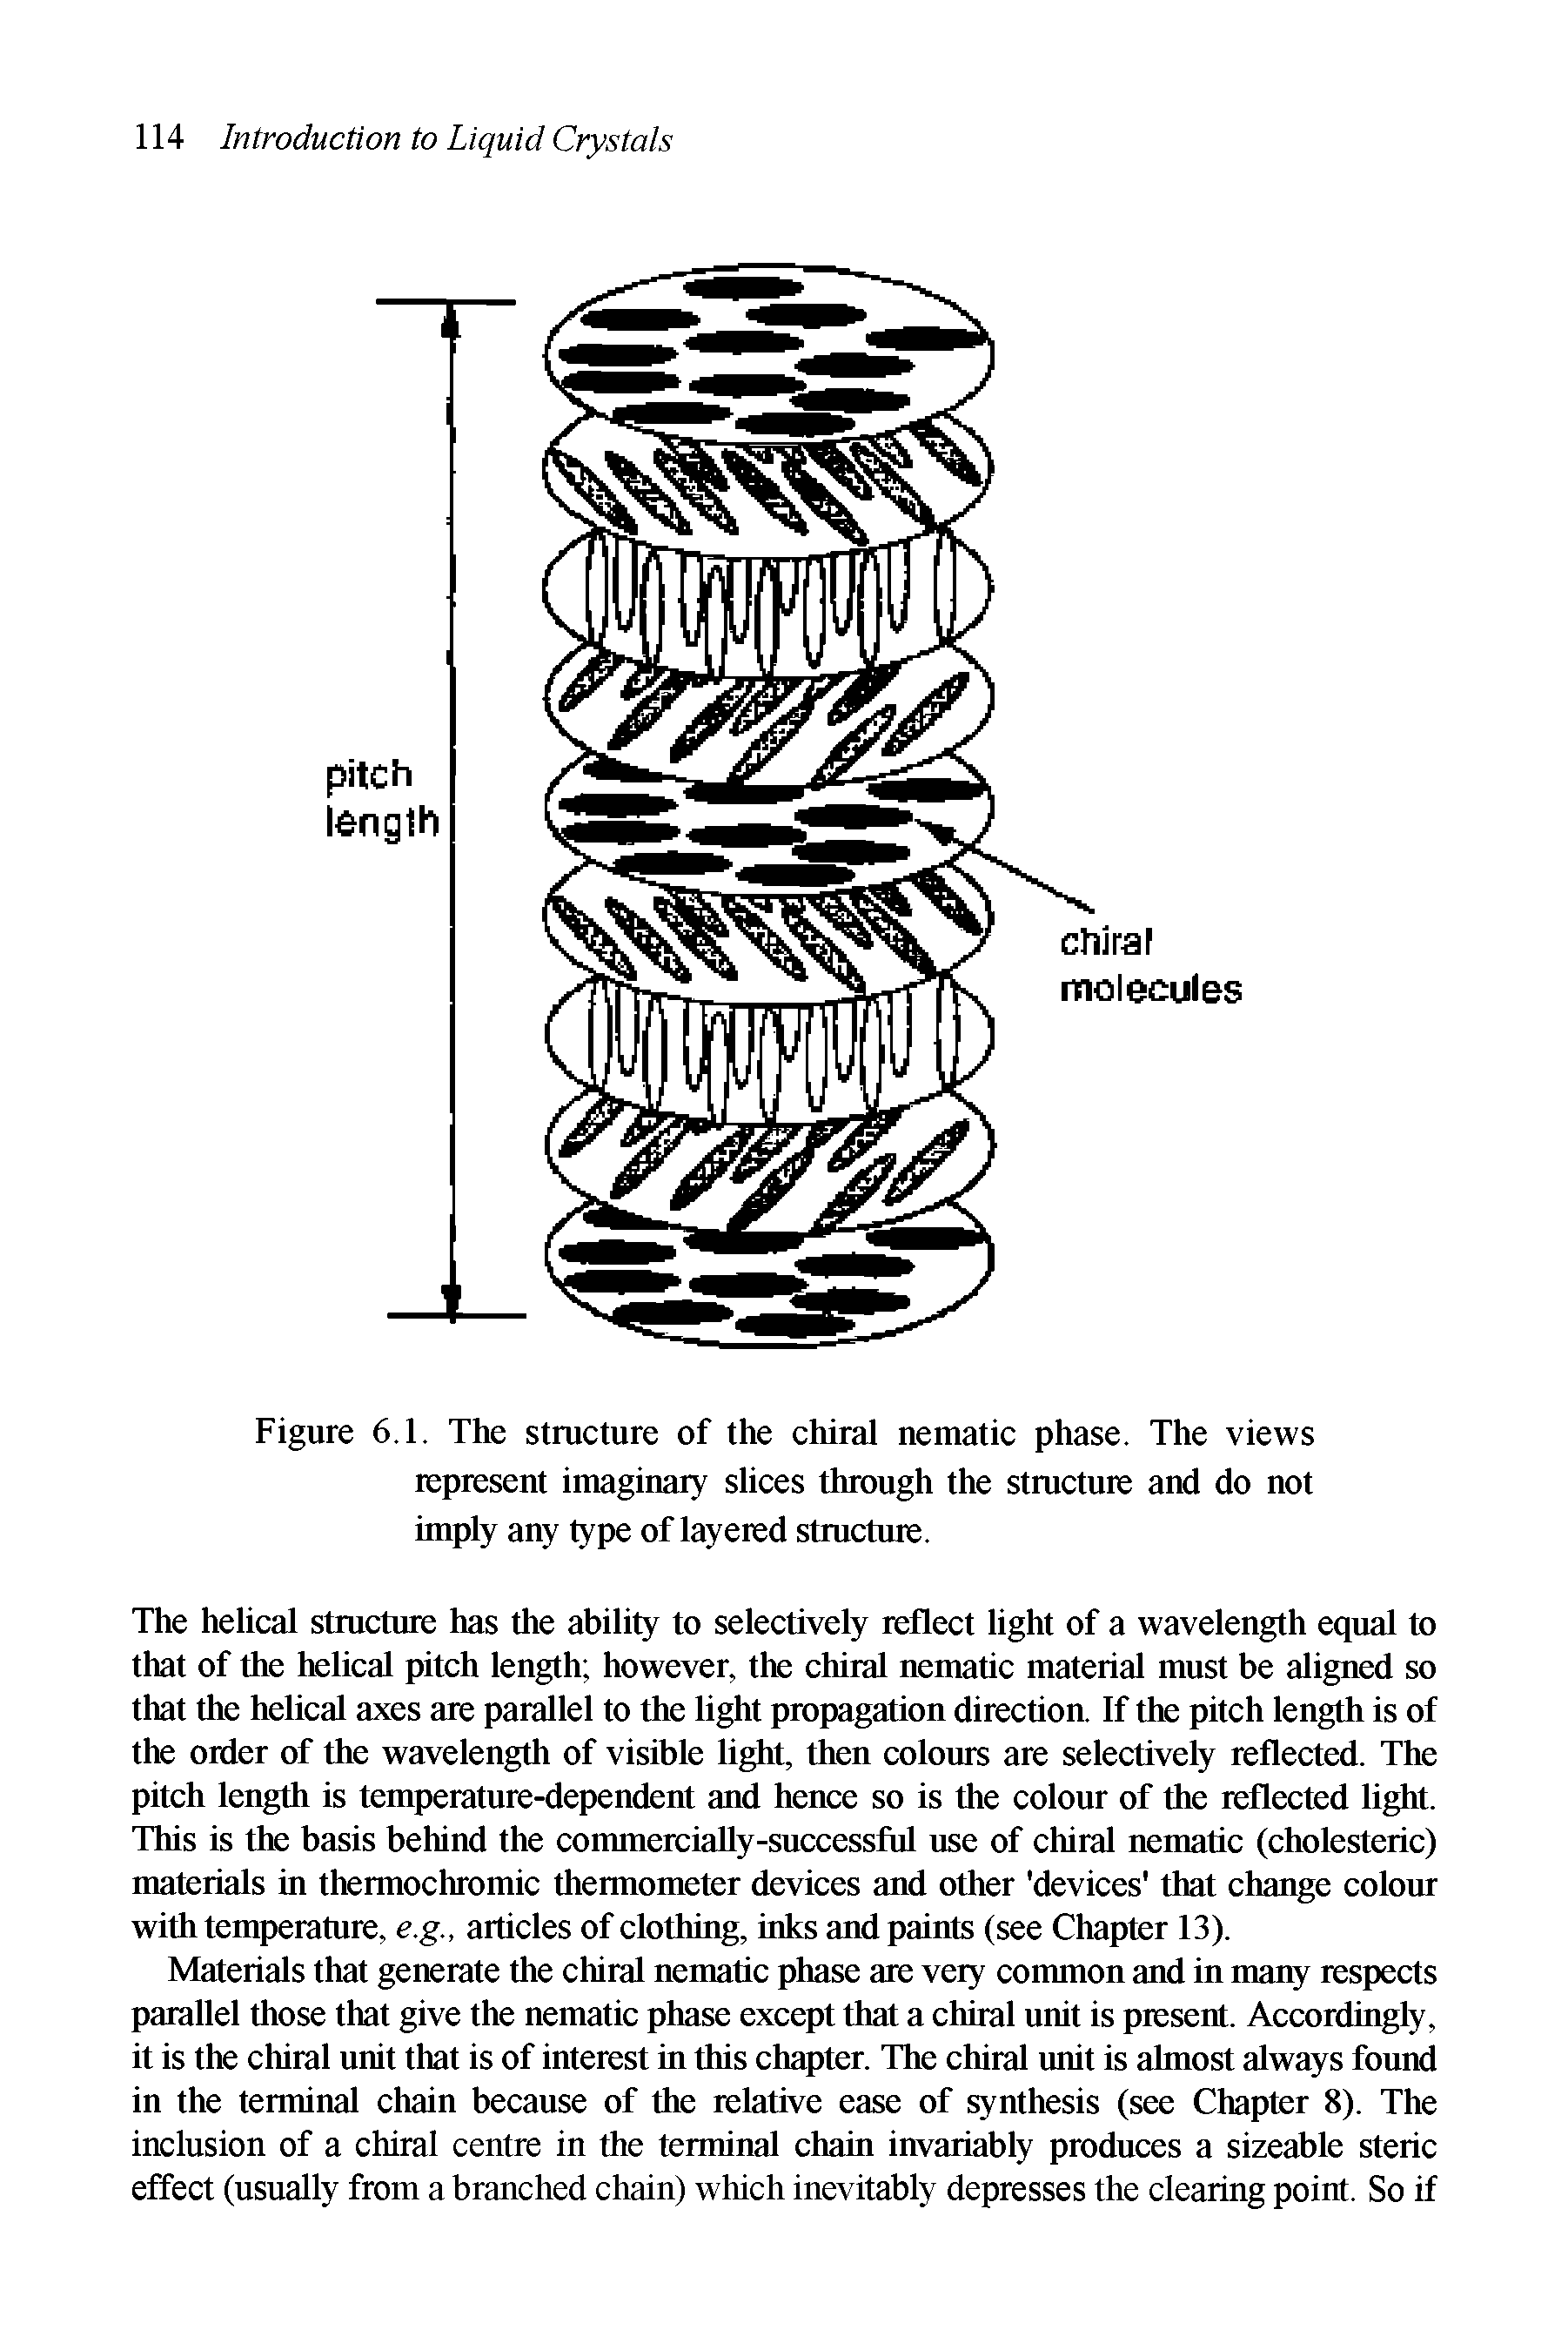 Figure 6.1. The structure of the chiral nematic phase. The views represent imaginary slices through the stracture and do not imply any type of layered stracture.